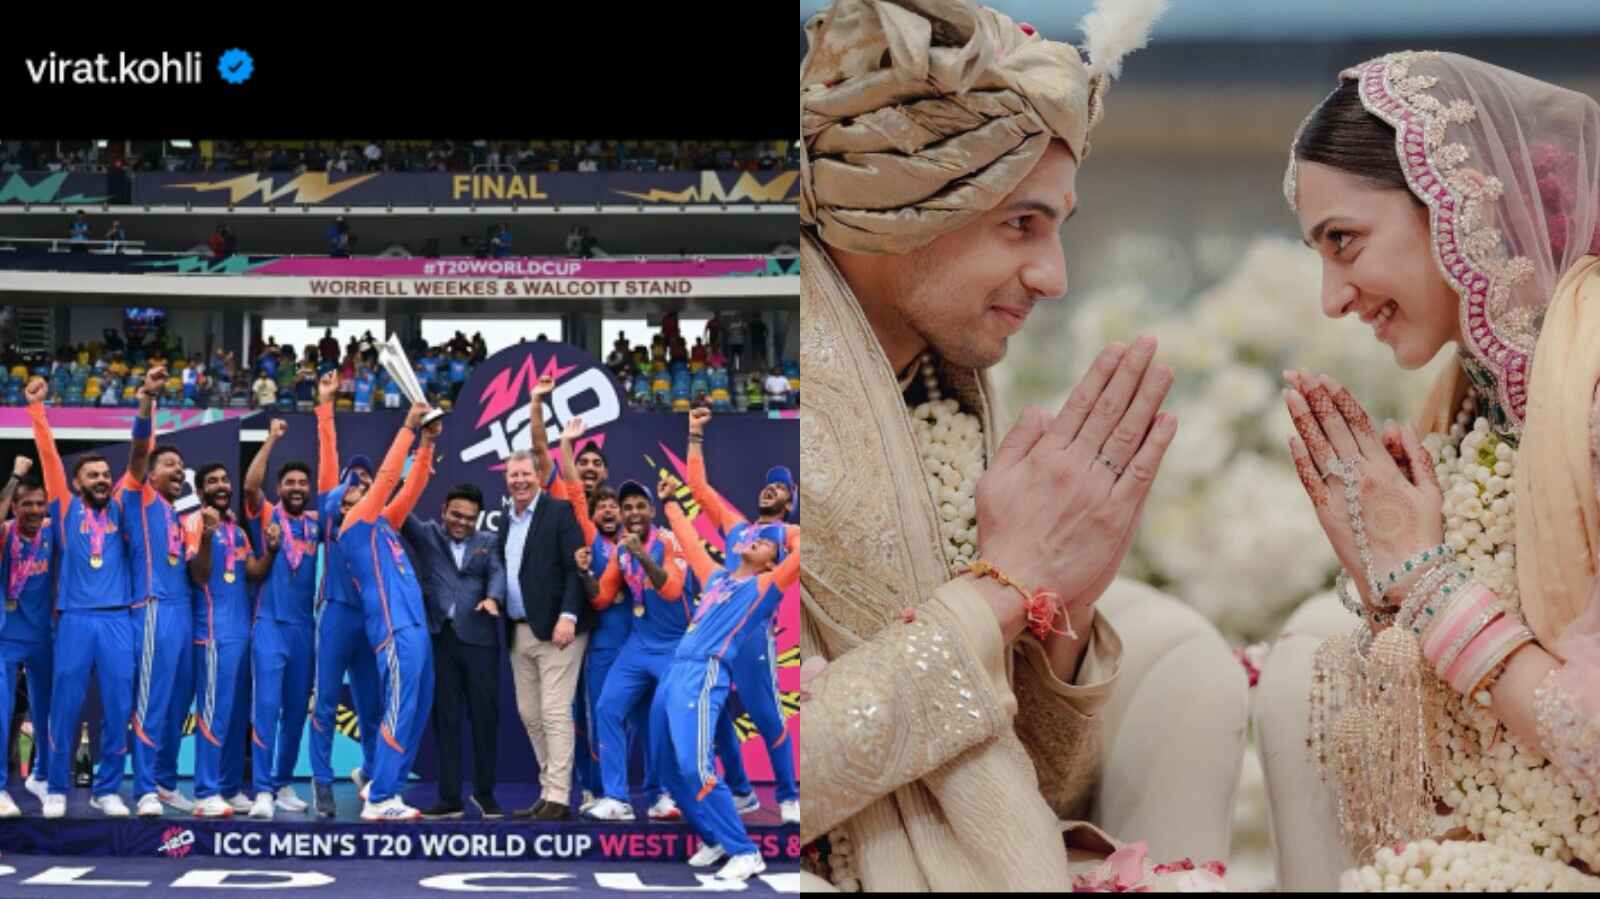 Virat Kohli's World Cup win post beats Sidharth-Kiara's wedding announcement to become the most-liked post on Instagram 904185